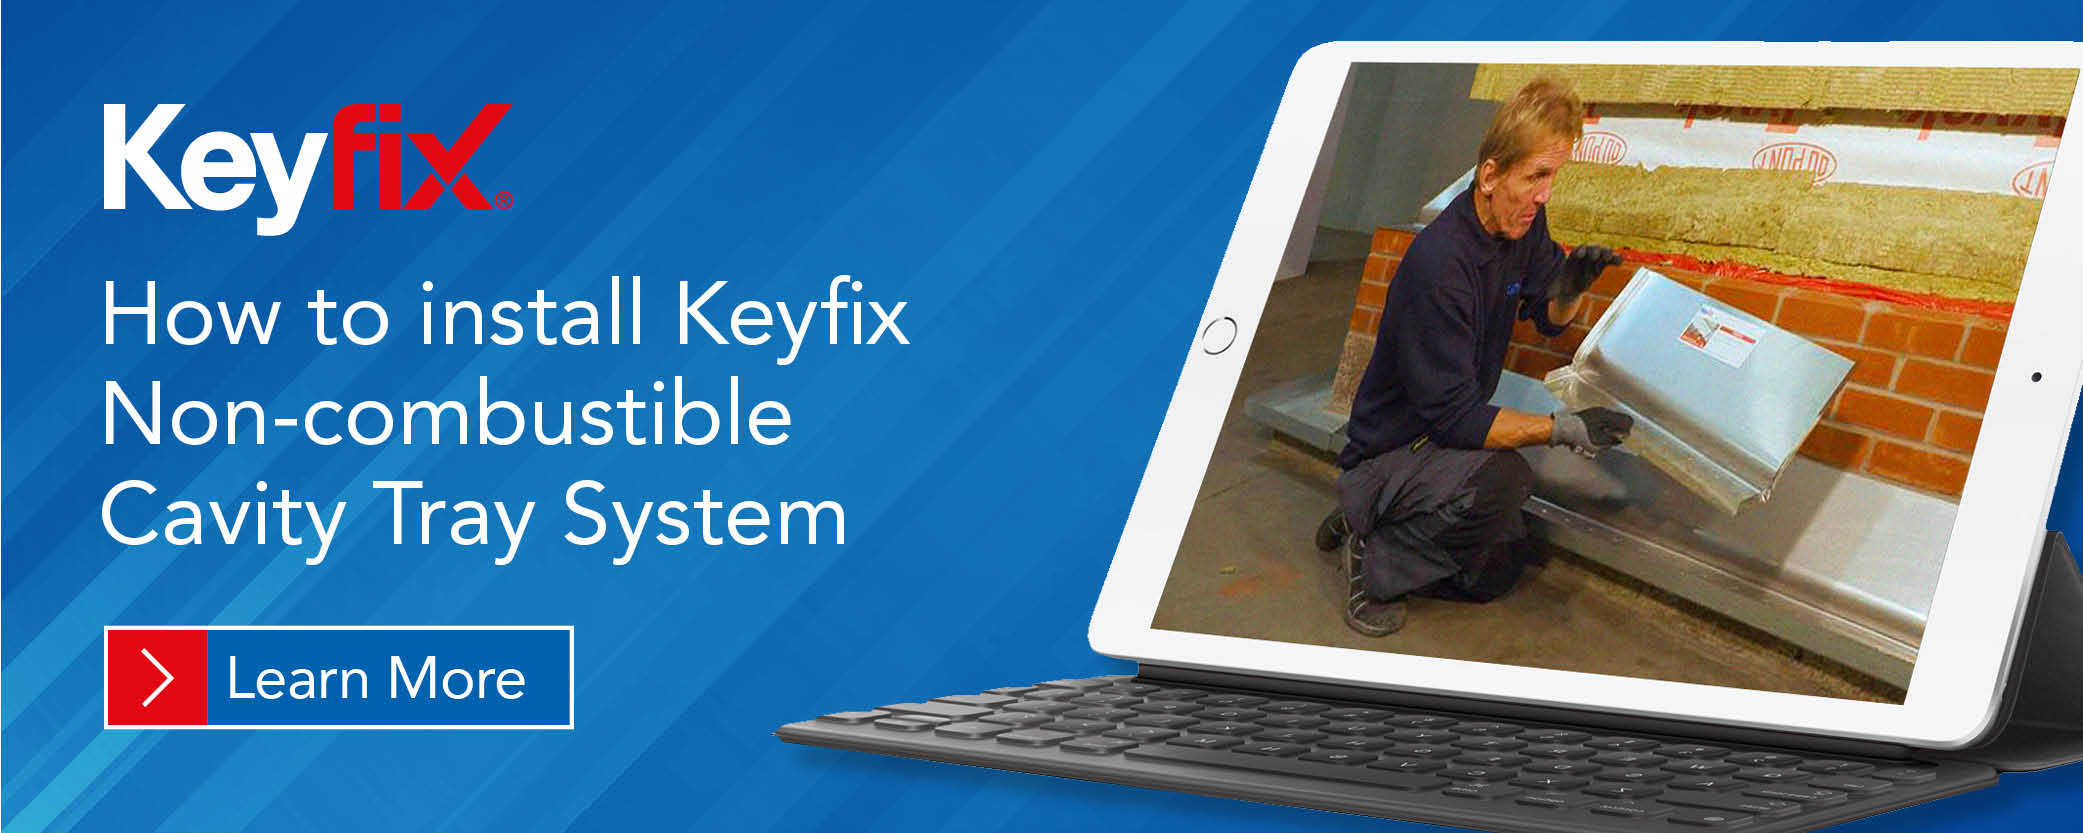 Video on “How to install Keyfix Non-combustible Cavity Tray System”